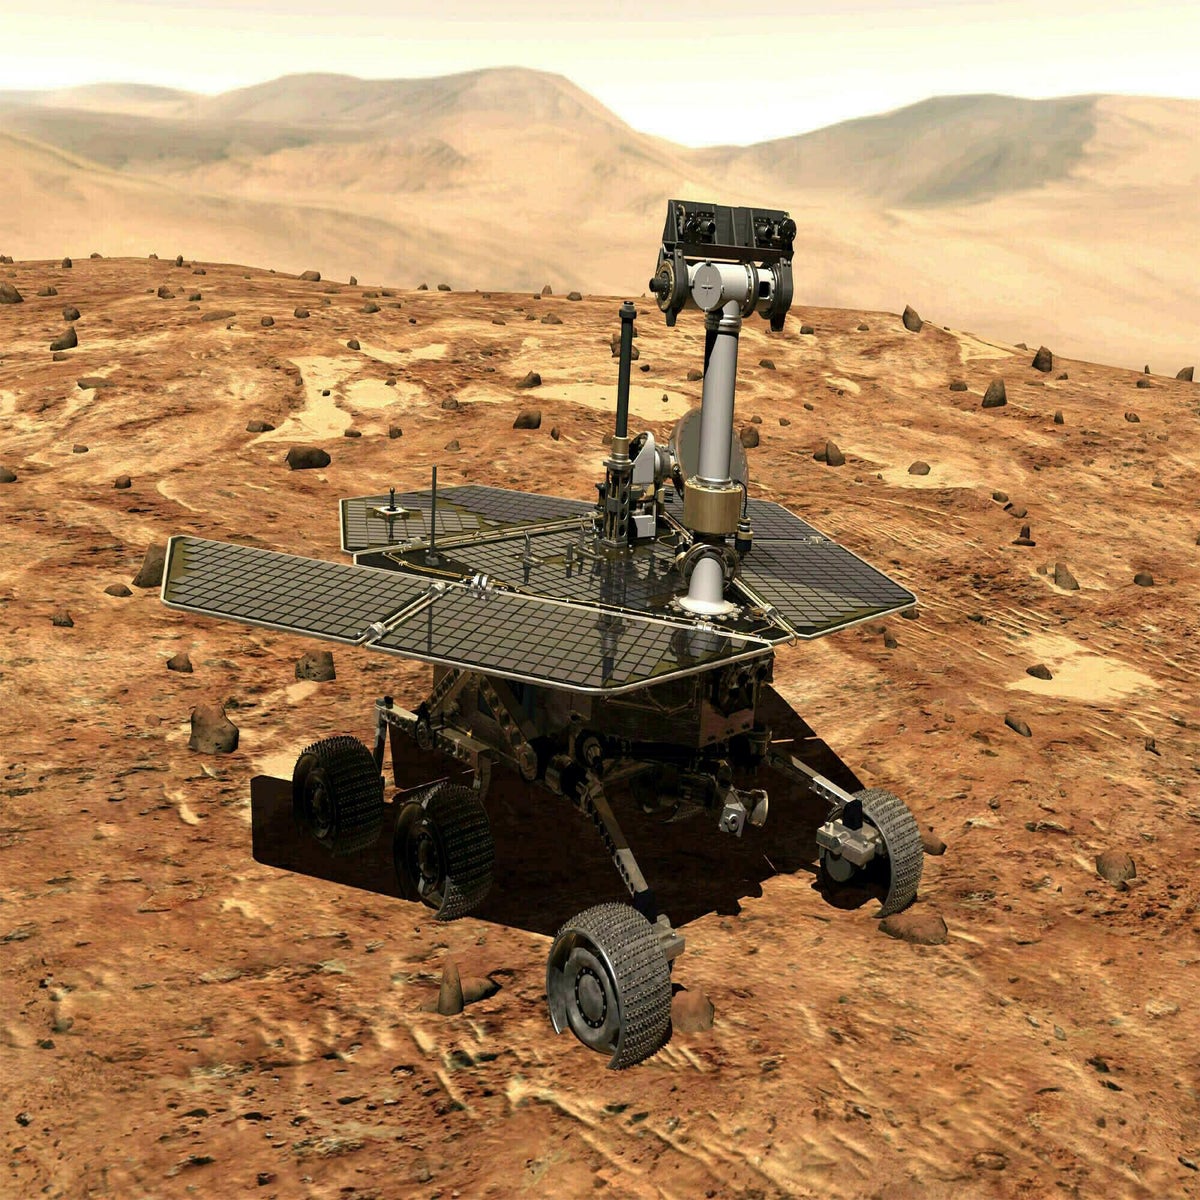 NASA Scientist Responds to Claims That Curiosity Rover Pics Show